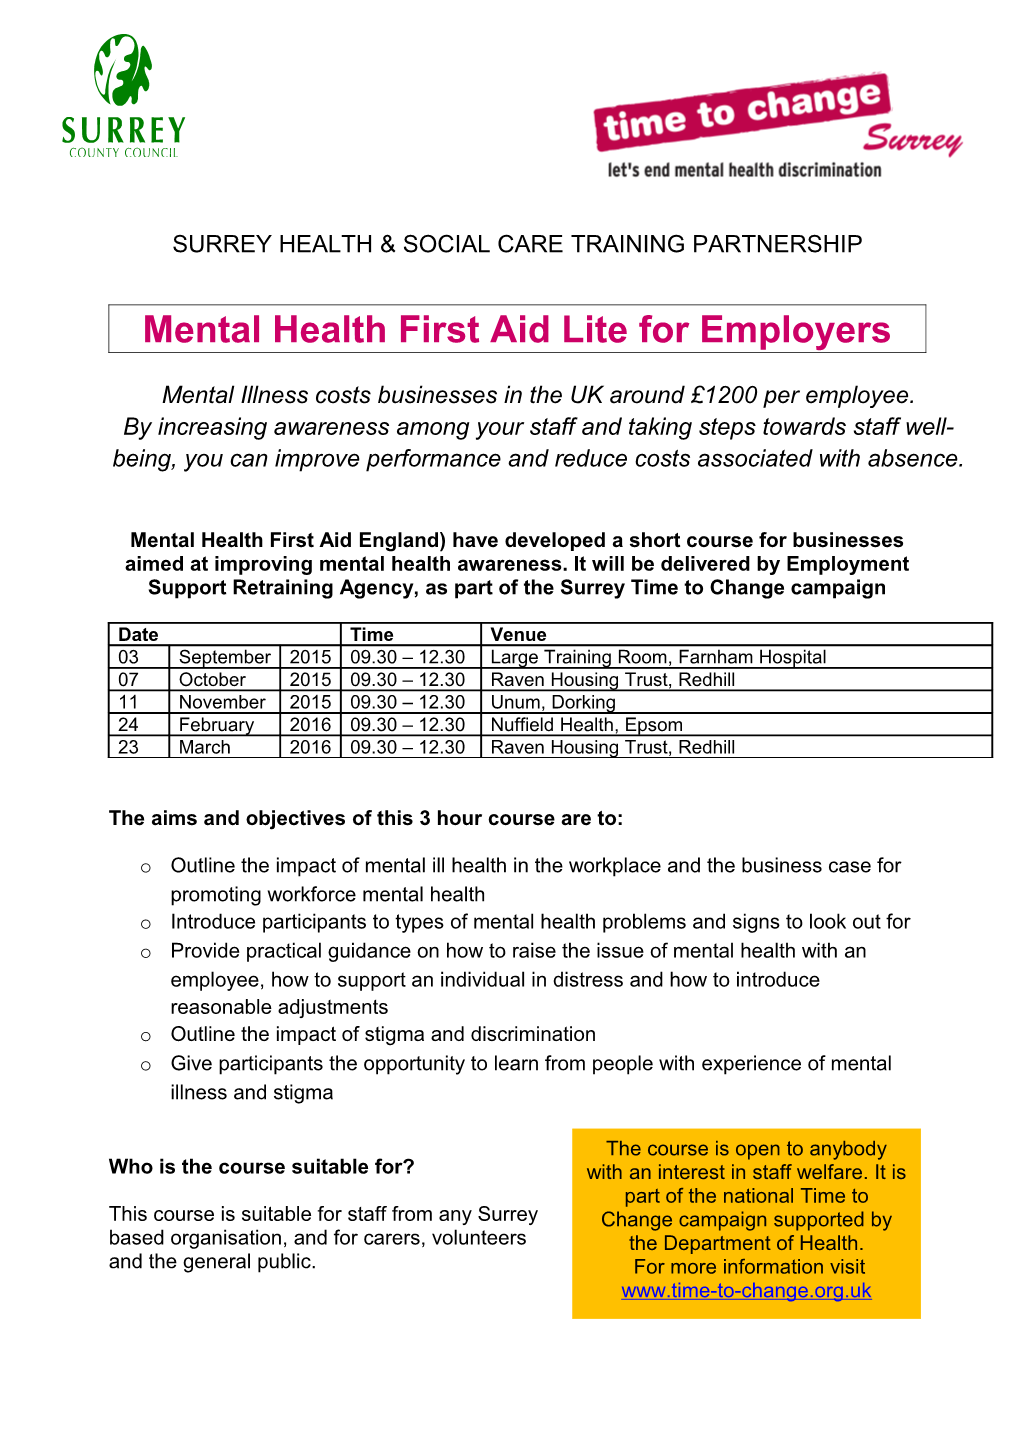 Mental Health First Aid Lite for Employers